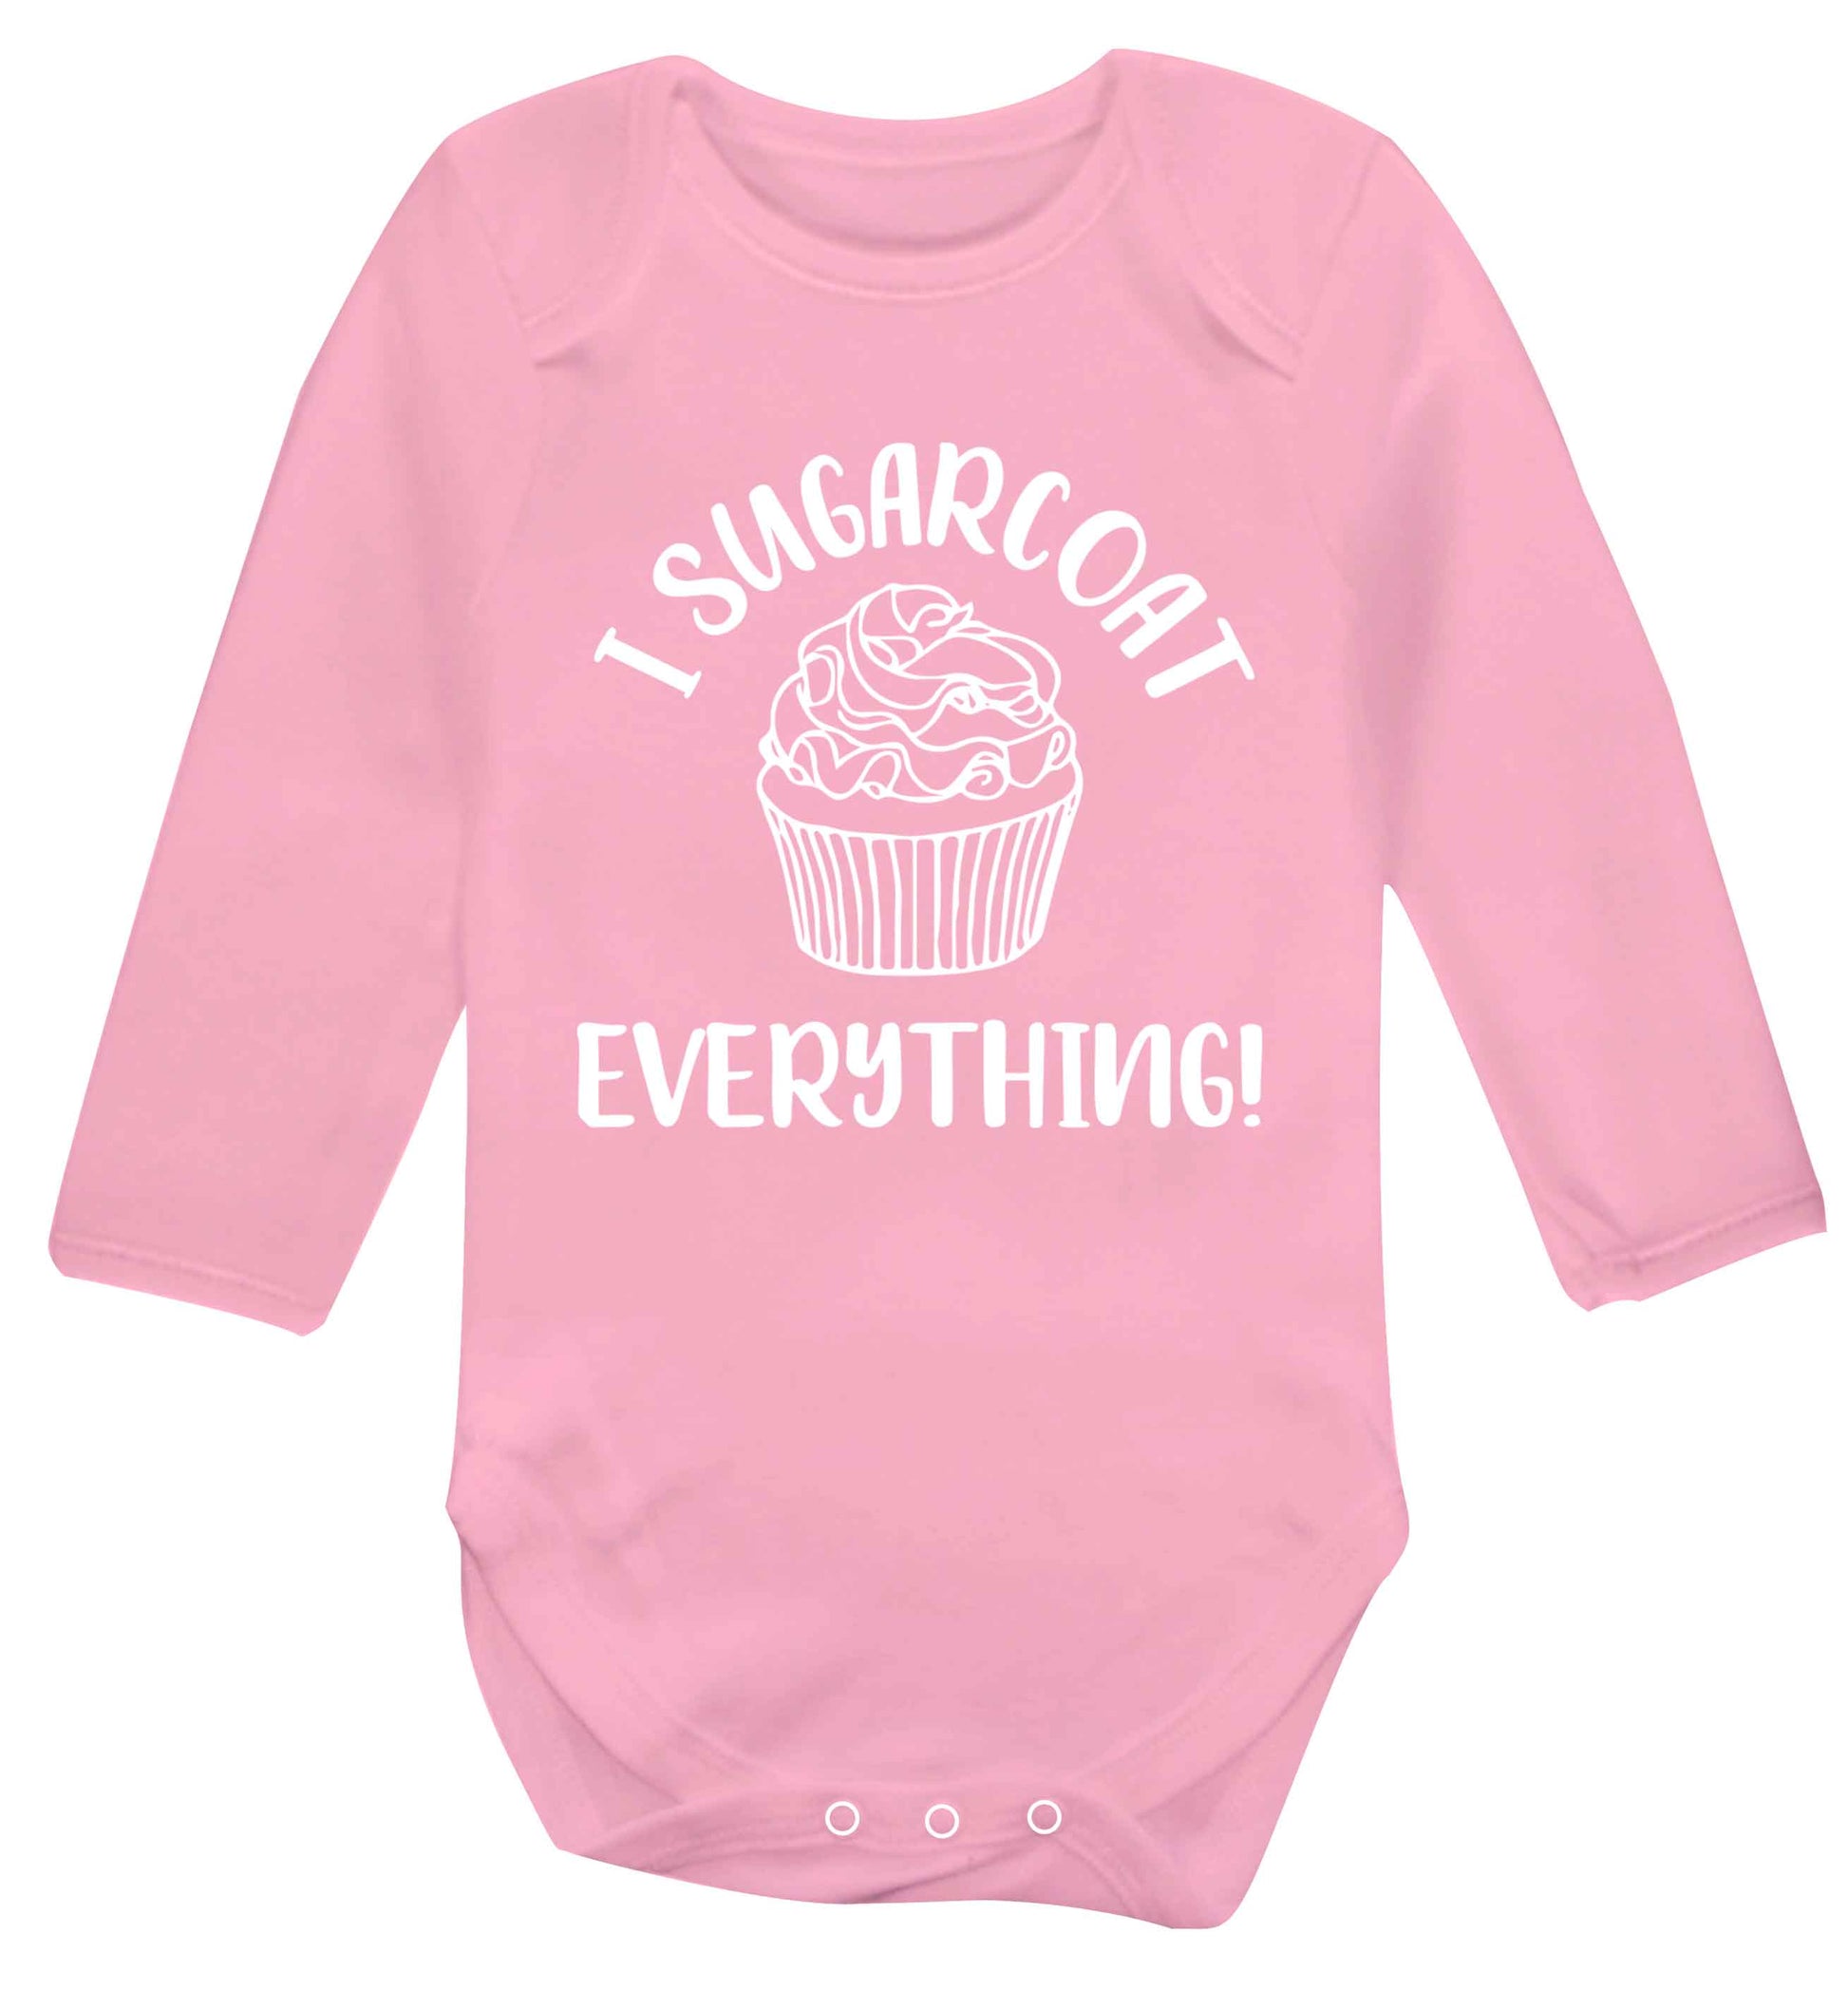 I sugarcoat everything Baby Vest long sleeved pale pink 6-12 months